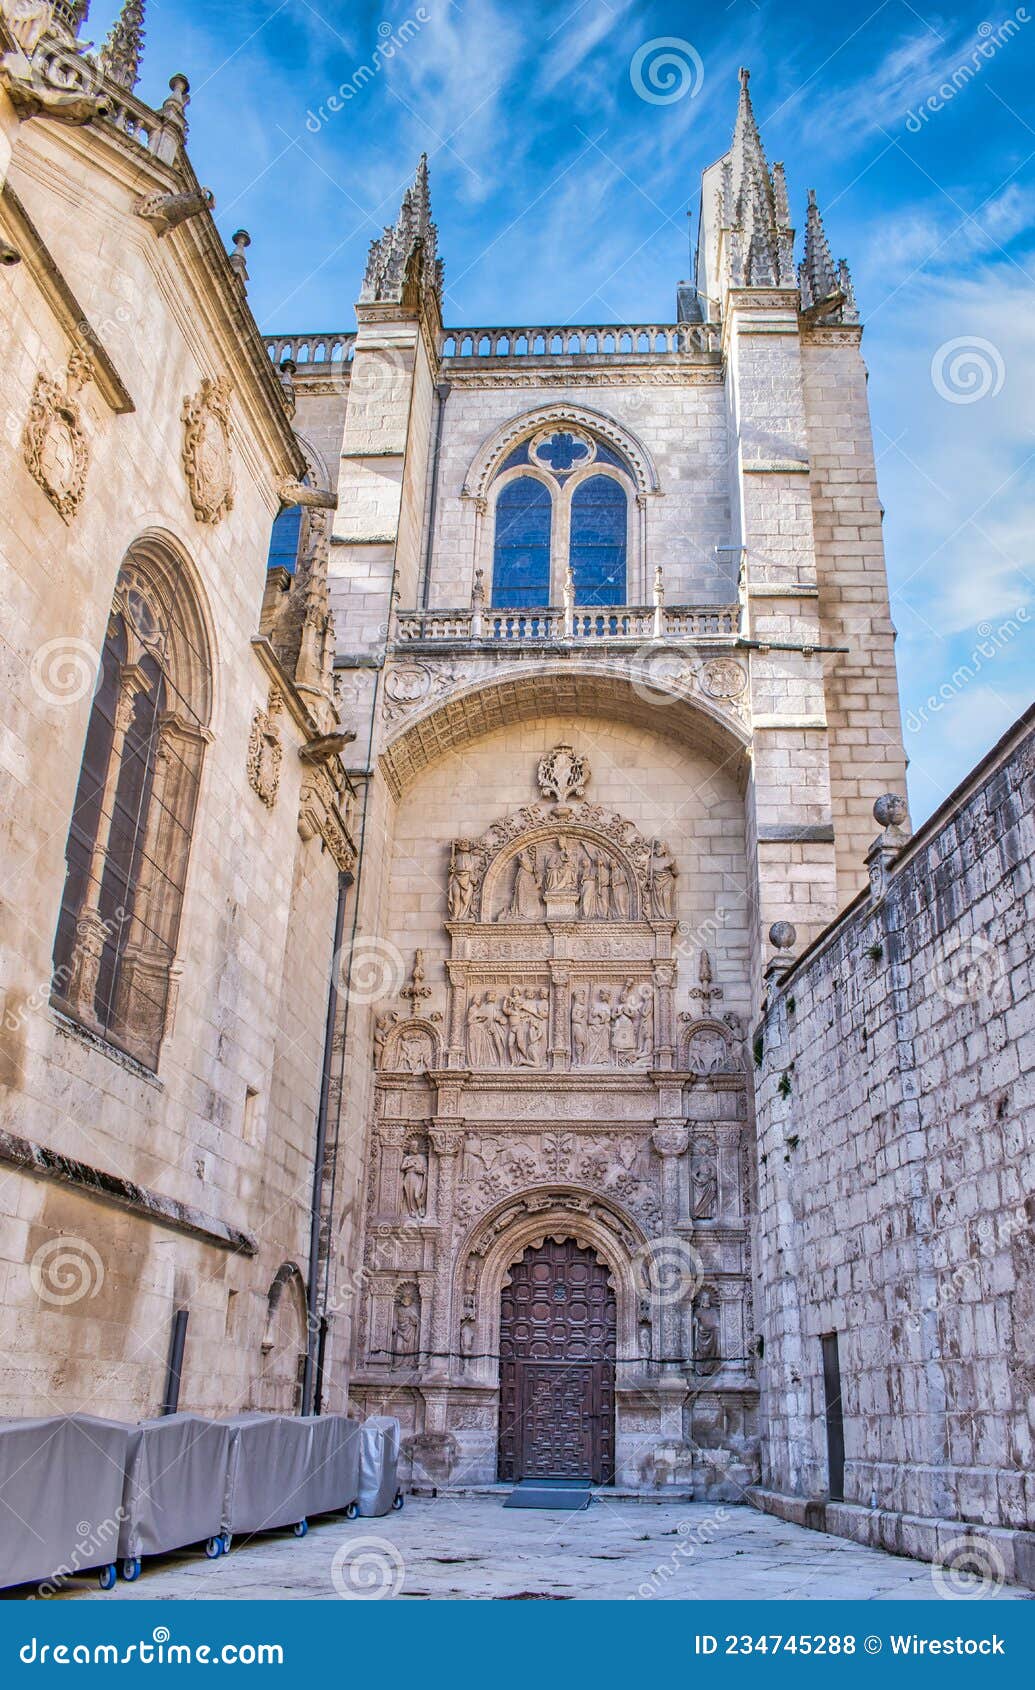 beautiful shot of the historic burgos cathedral in burgos, spain